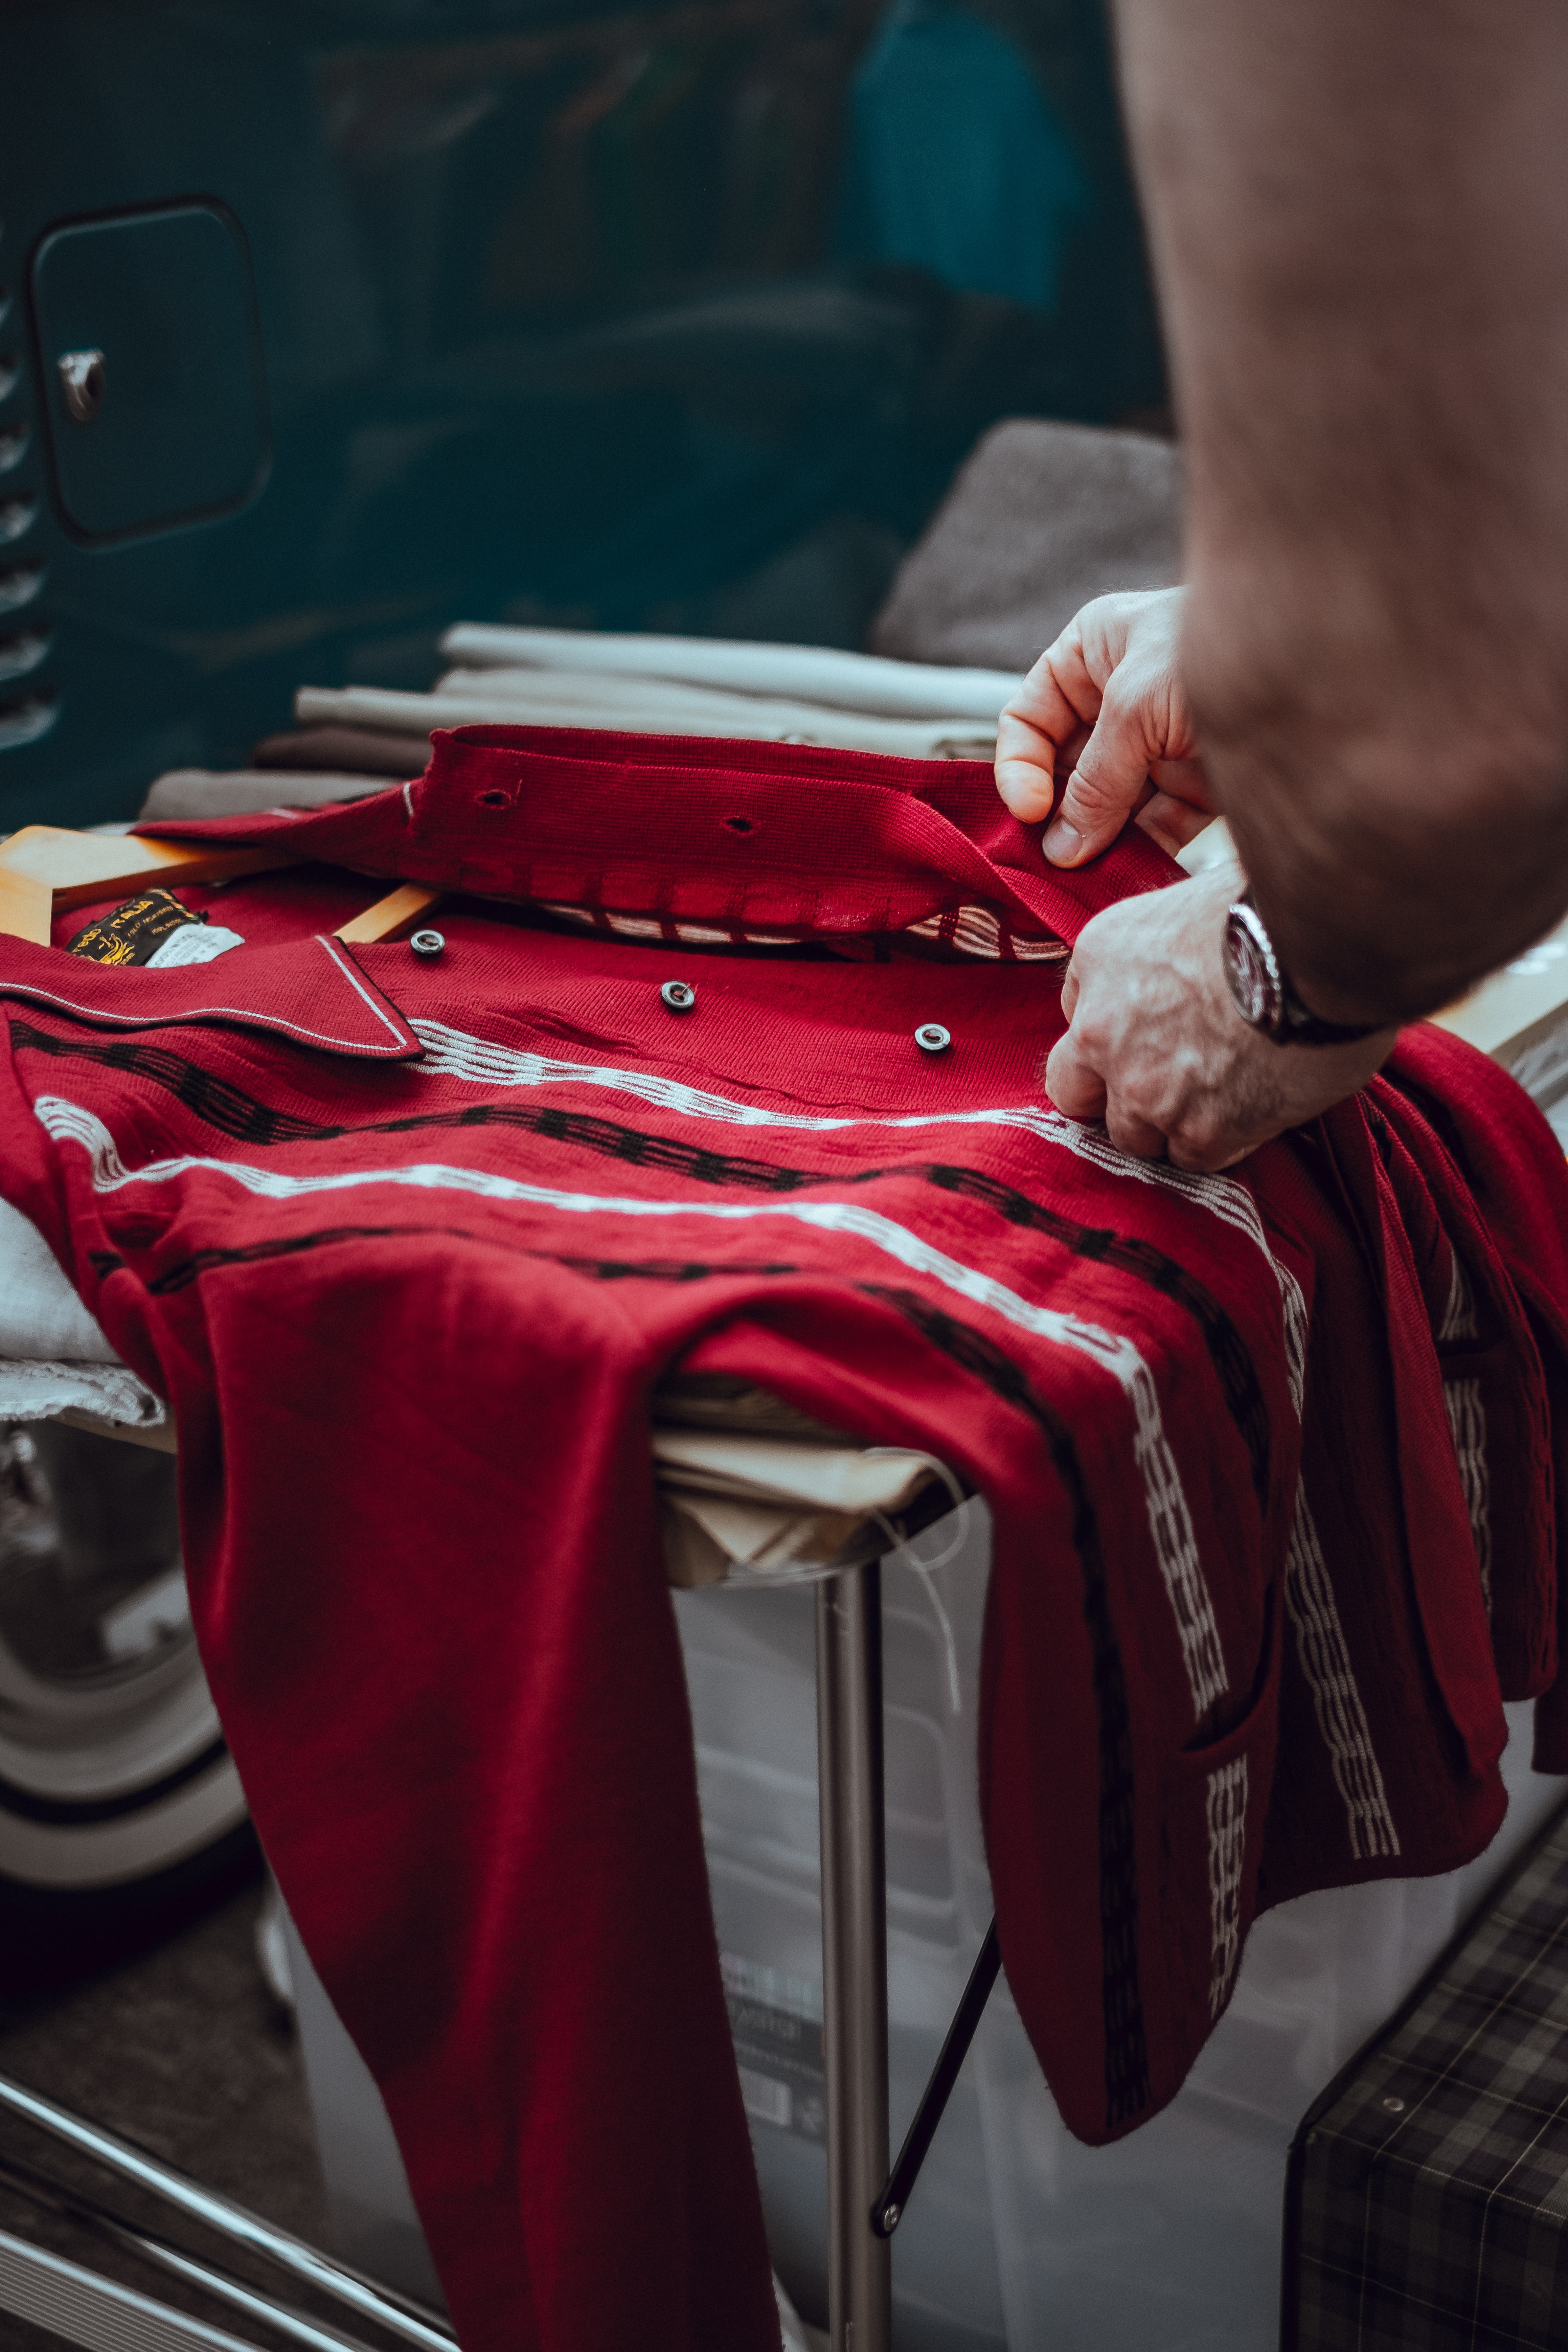 A person buttoning up a red shirt. | Source: Unsplash